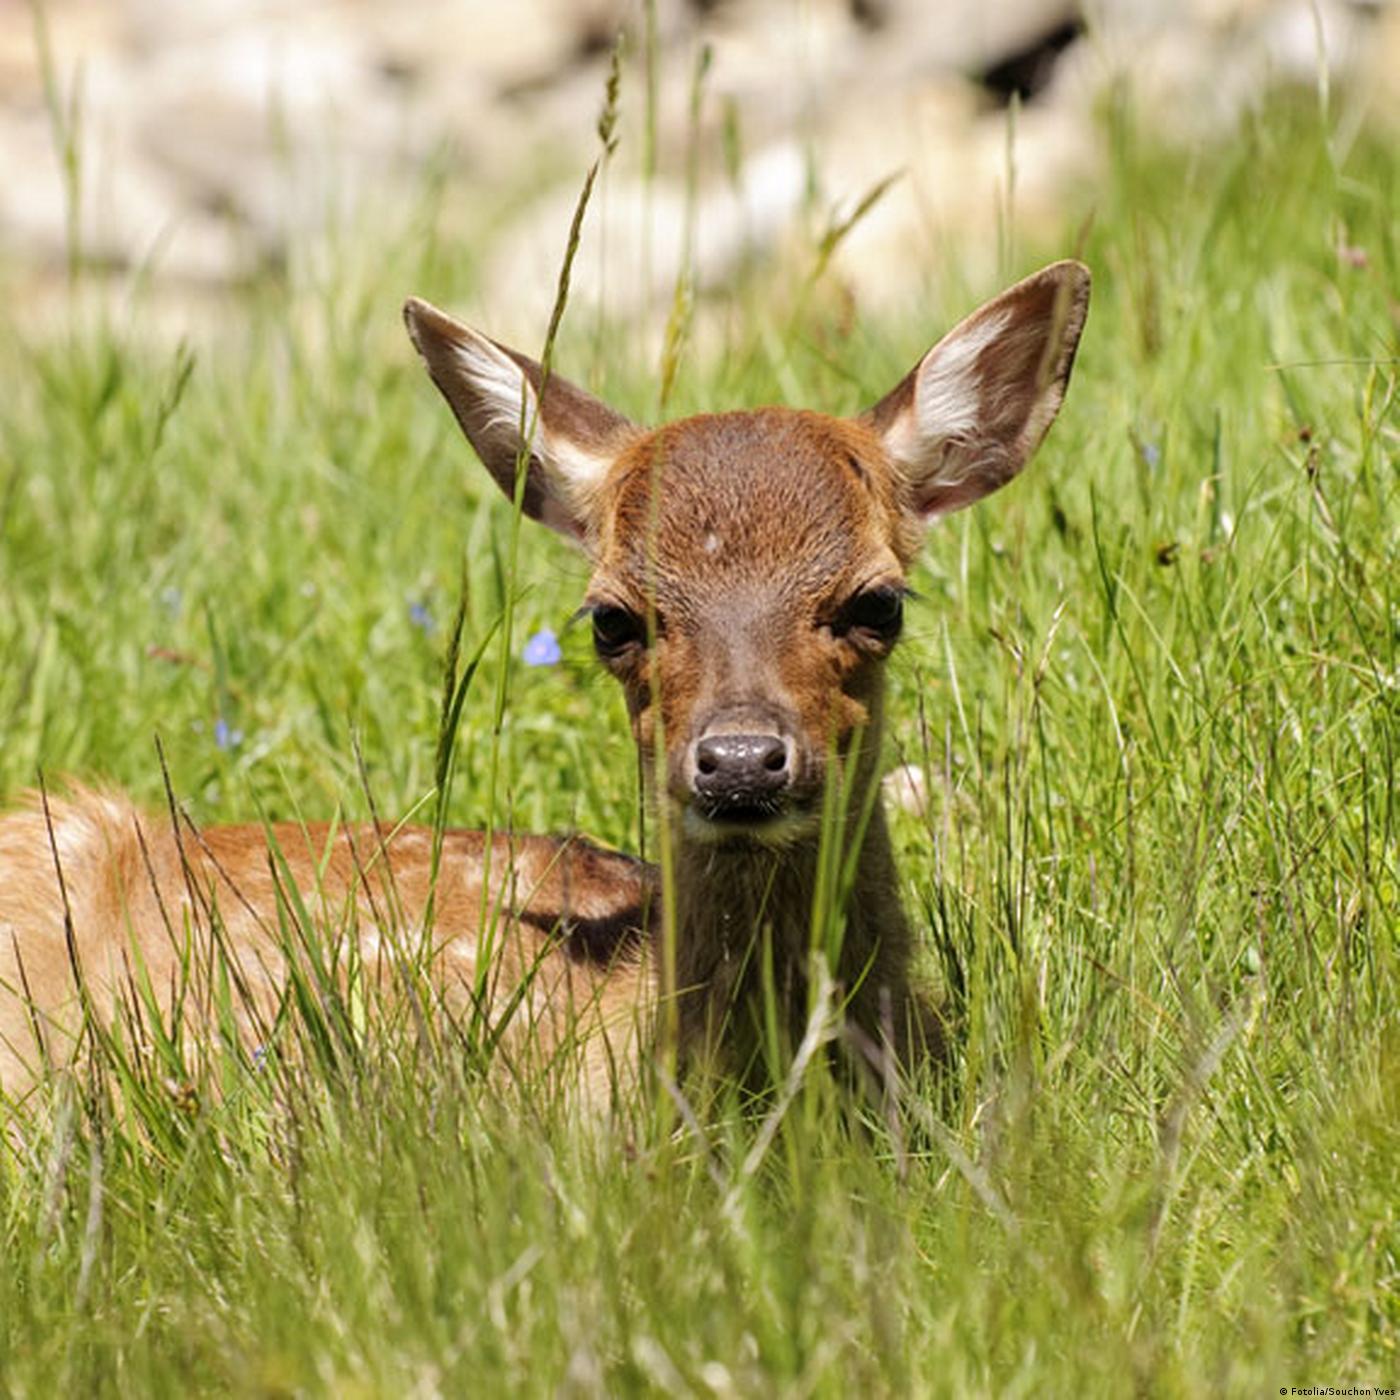 Germany: Rescuing the Fawns